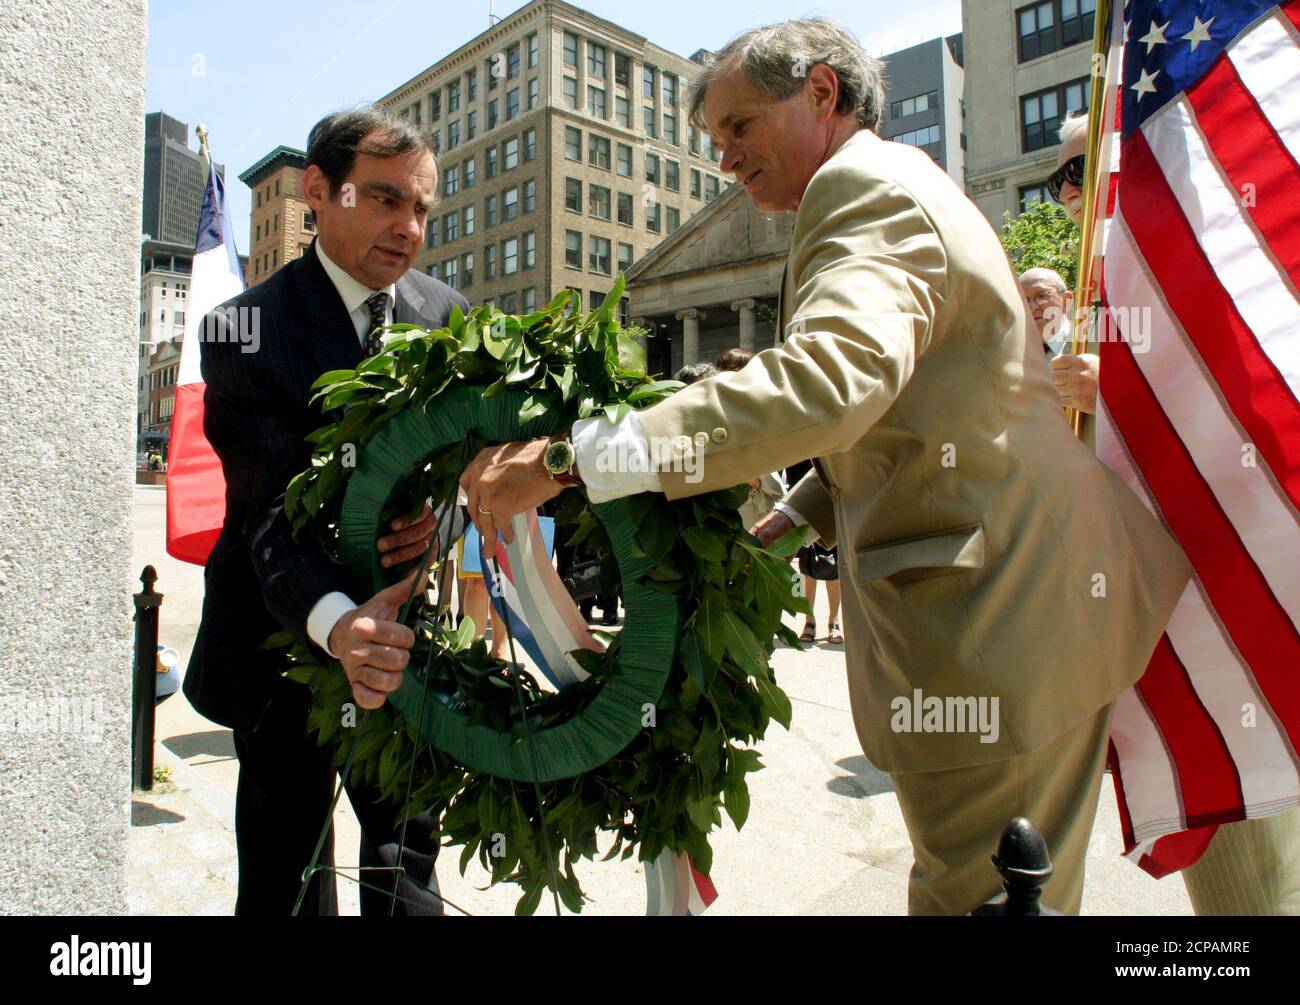 French Consul General in Boston Thierry Vankerk-Hoven (L) and Massachusetts Lafayette Society President William Dunham (R) lay a wreath at a memorial commemorating the Marquis de Lafayette, a French General and politician who became a hero in the American revolutionary war, at ceremonies in Boston, May 20, 2003. French and local officials joined together on the 169th anniversary of his death to reassert the common democratic values of the two countries despite recent diplomatic and military policy differences. REUTERS/Jim Bourg  JRB Stock Photo